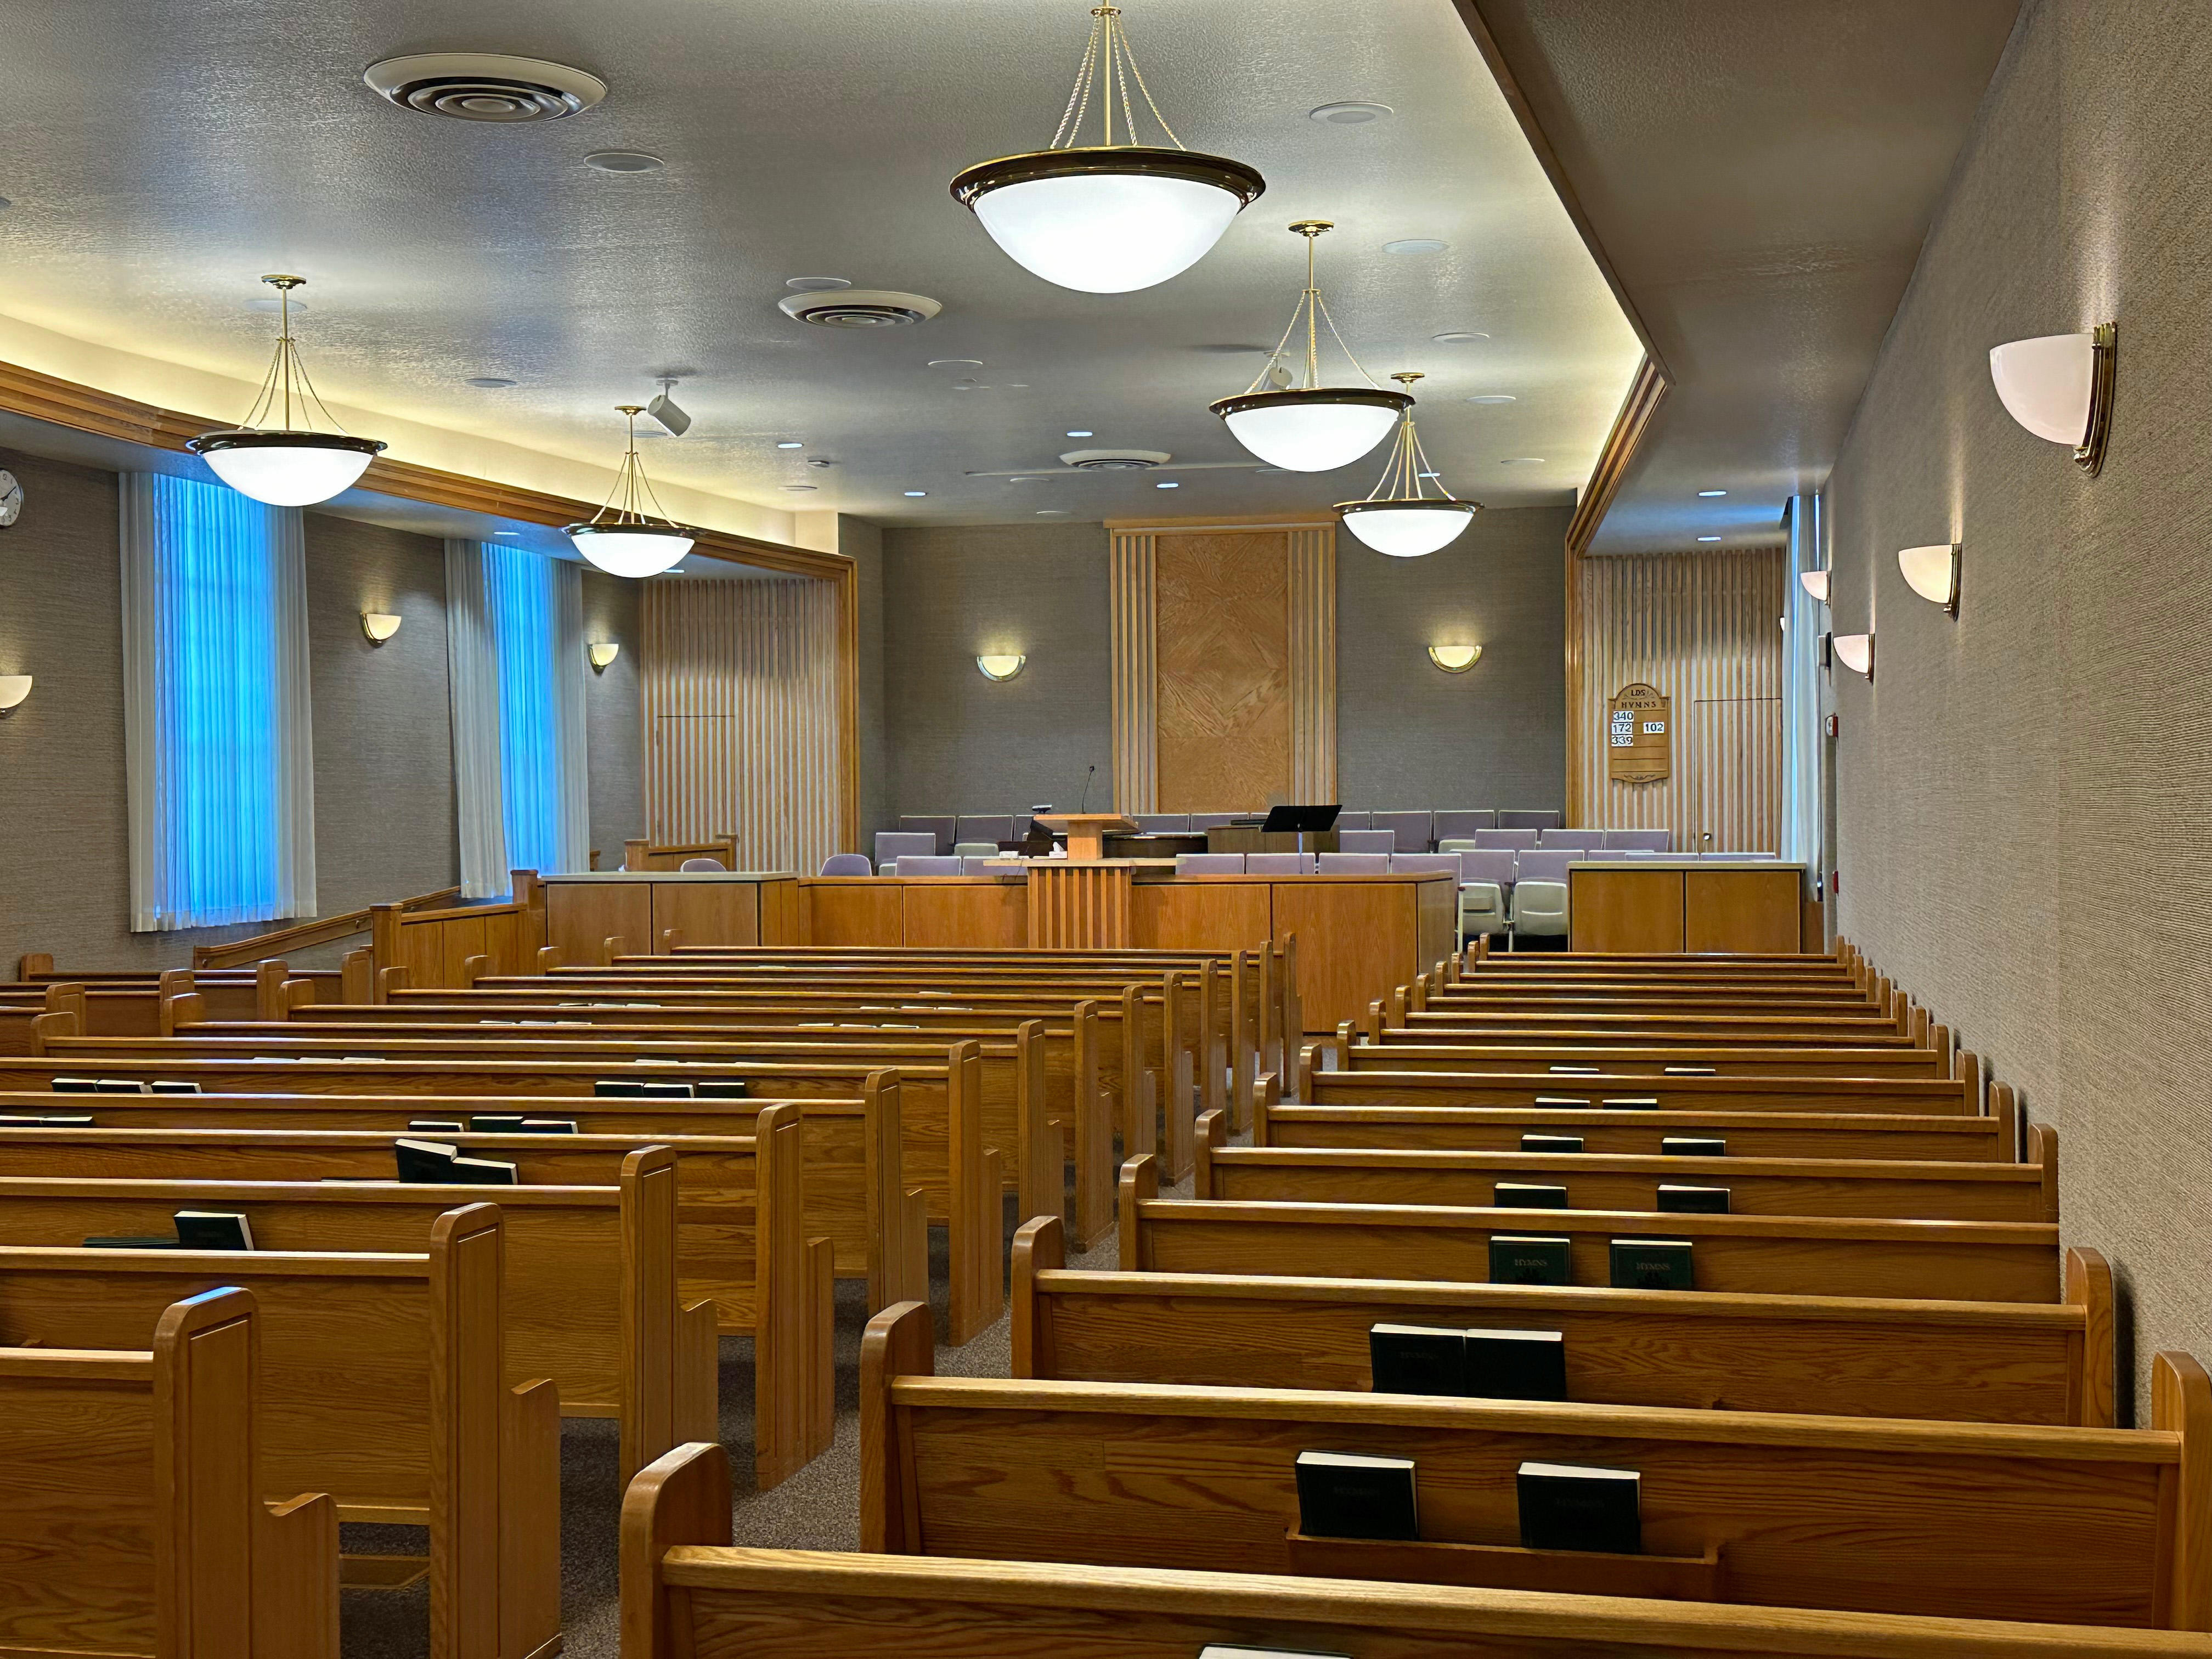 Chapel where worship services are held